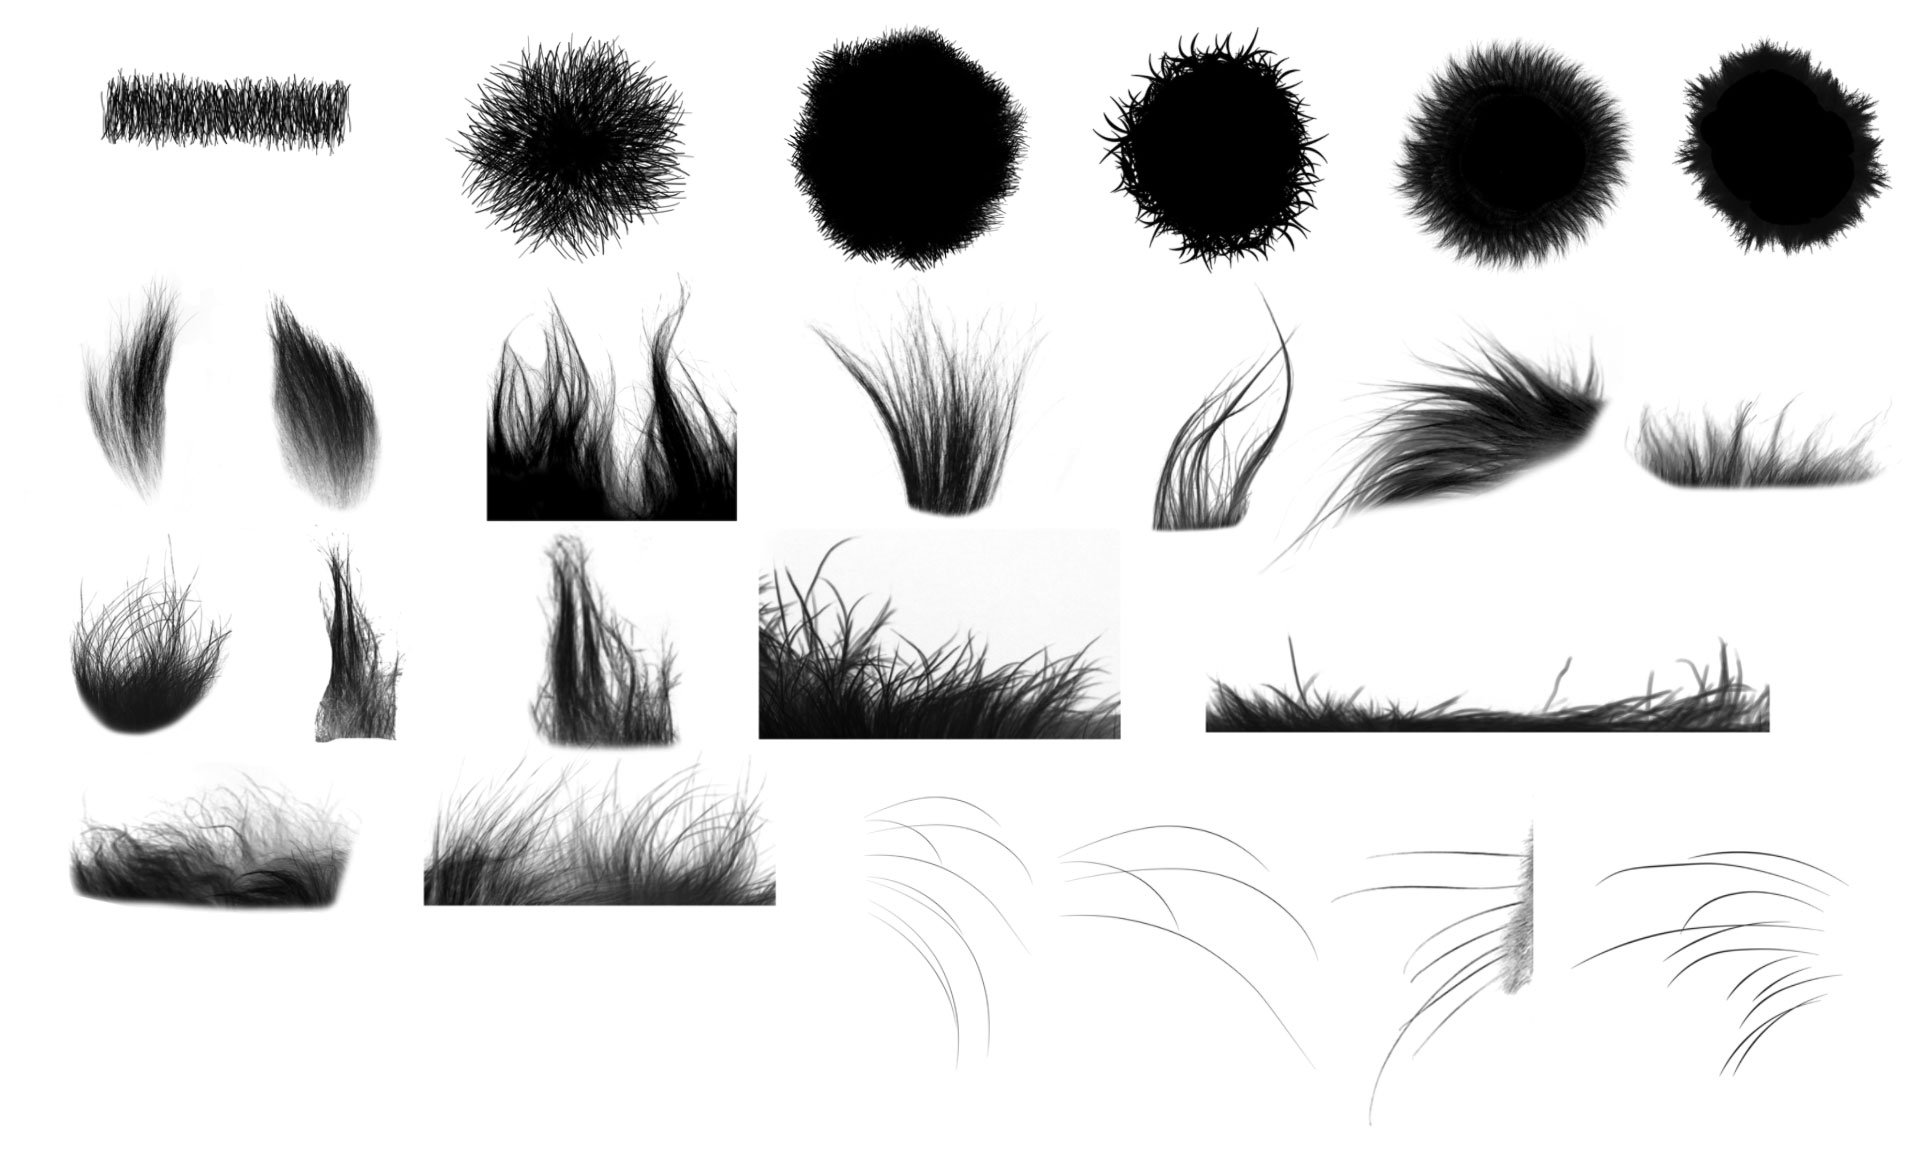 photoshop cc brushes pack free download pencil